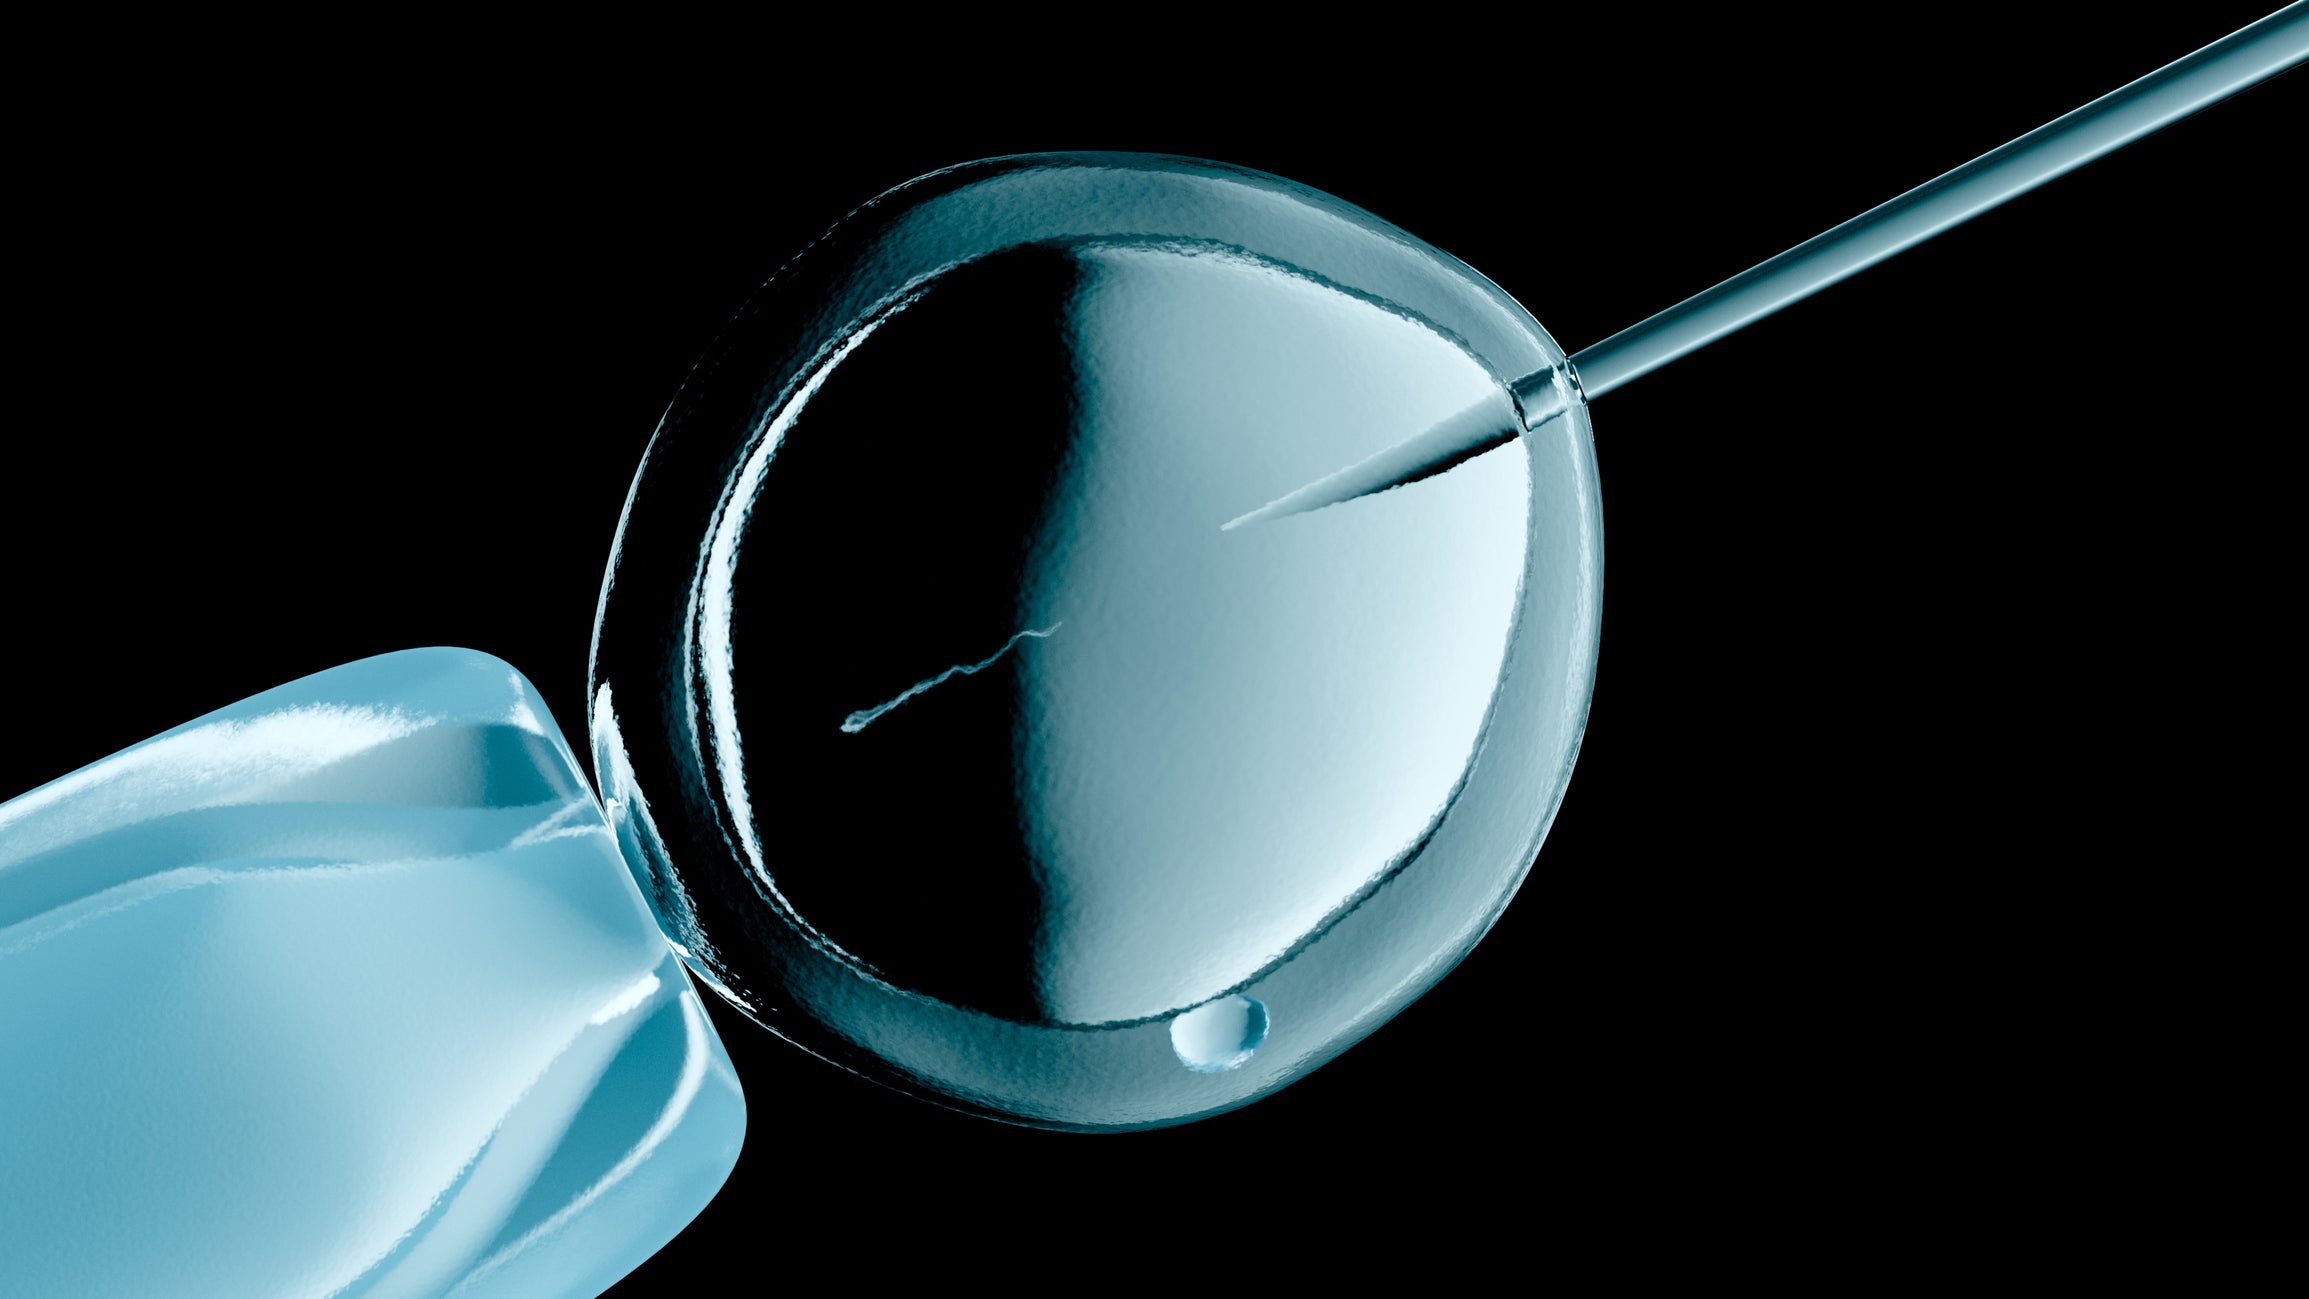 Alabama's IVF Decision And Its Impact On Black Reproductive Health